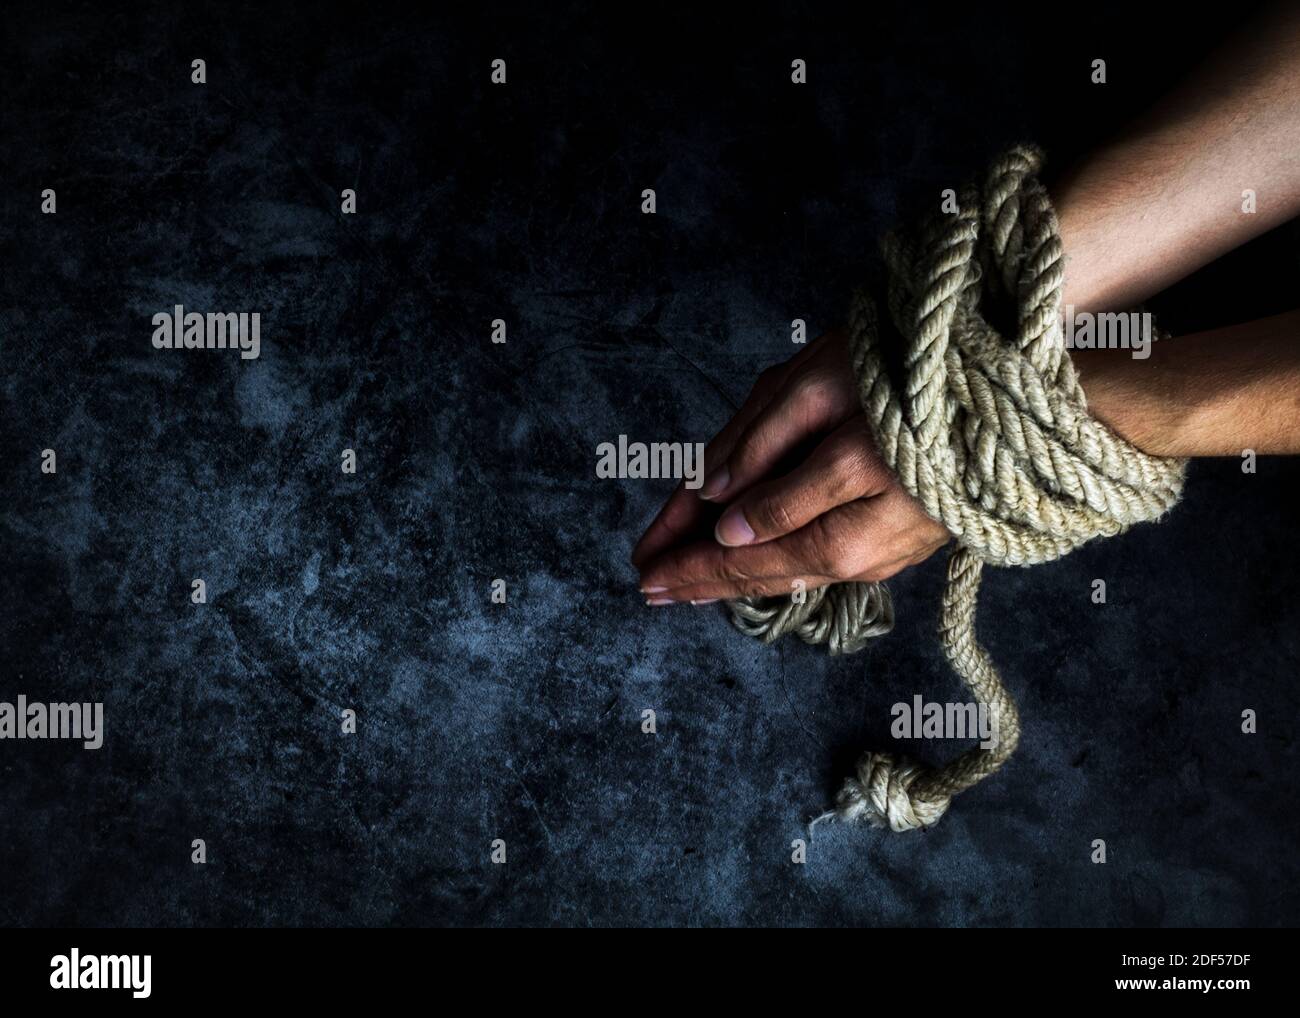 Tied hands of a woman Stock Photo